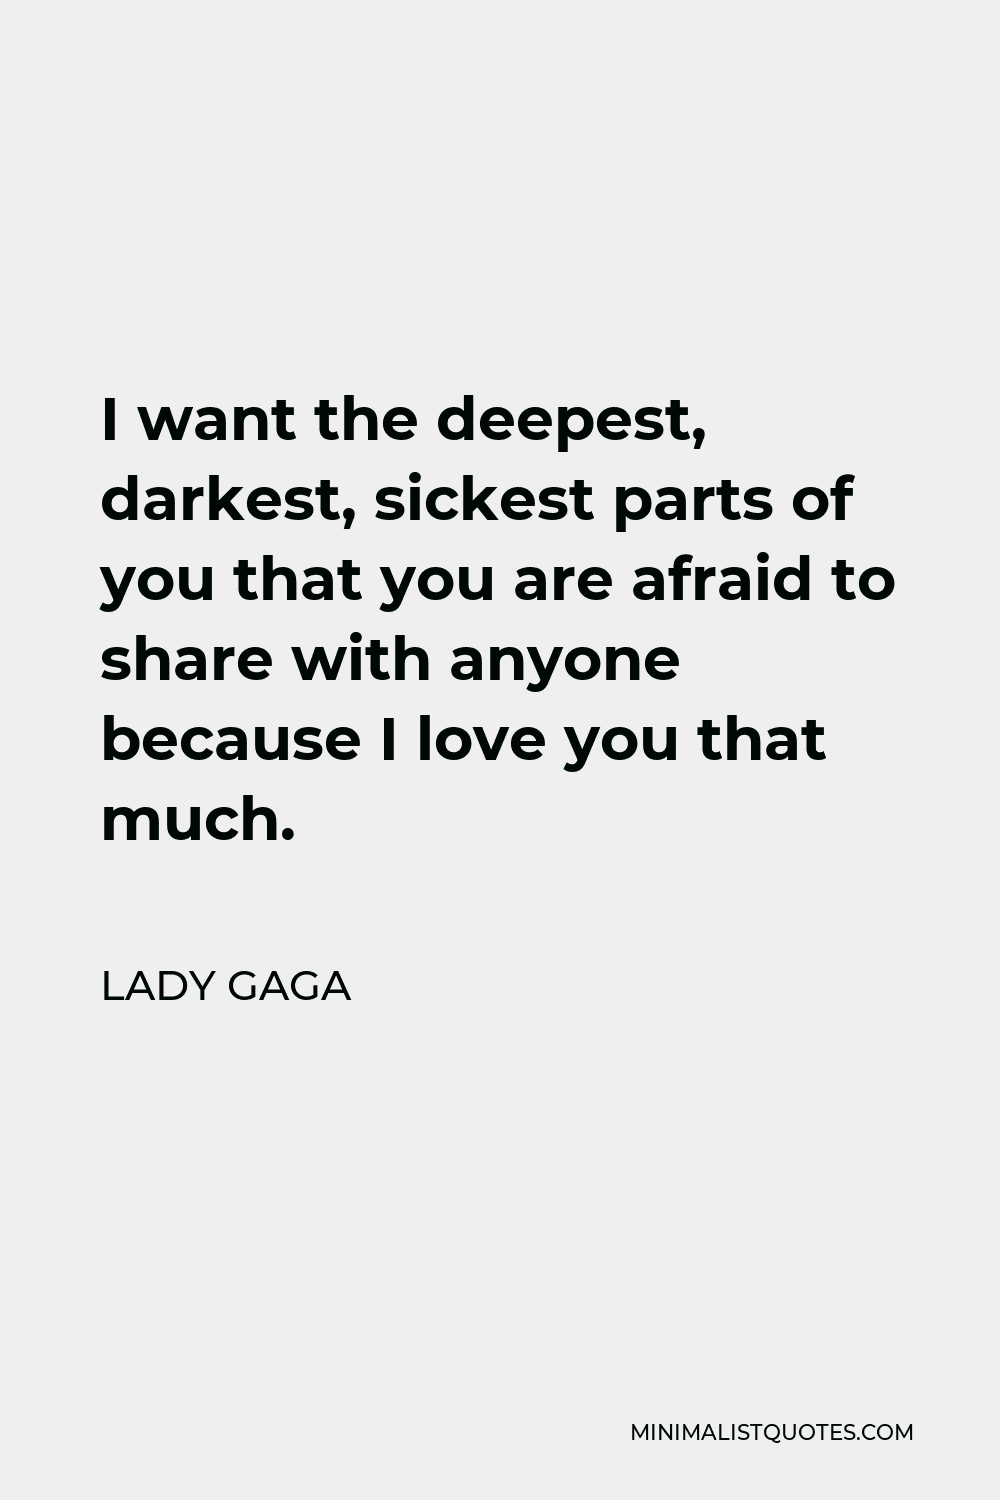 Lady Gaga Quote - I want the deepest, darkest, sickest parts of you that you are afraid to share with anyone because I love you that much.